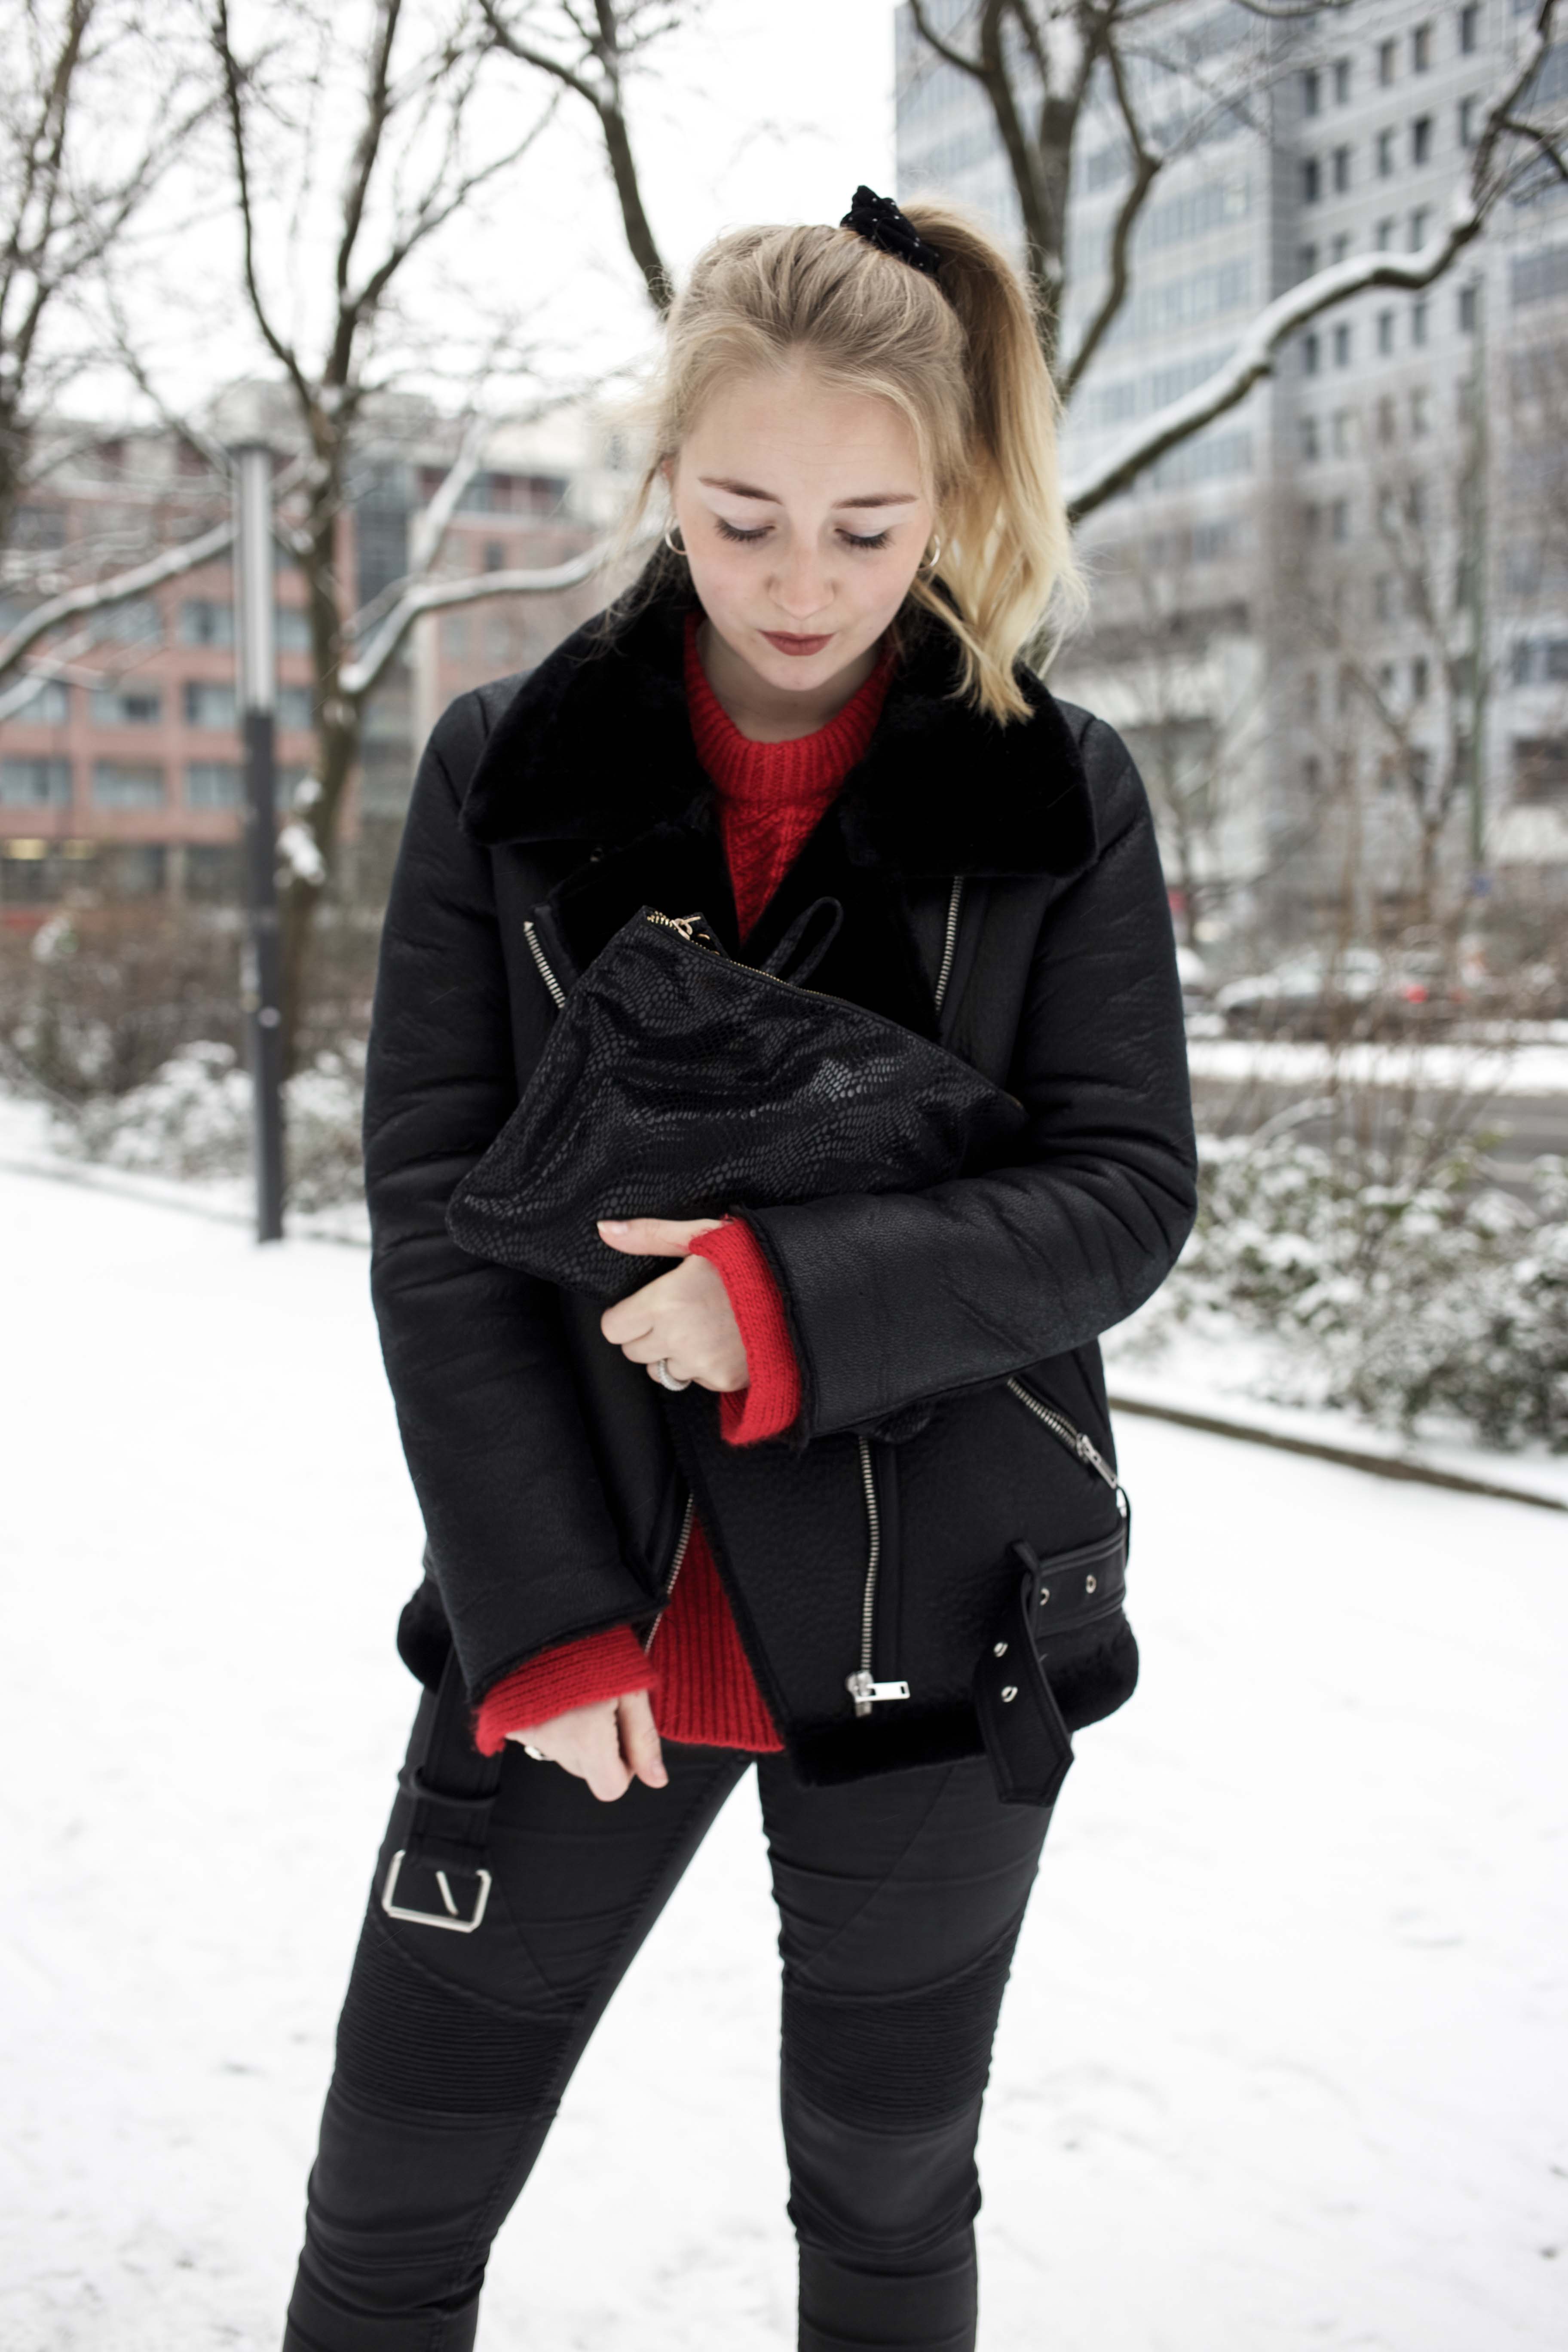 roter-pullover-outfit-berlin-schnee-streetstyle-fashionblog-modeblog_8371